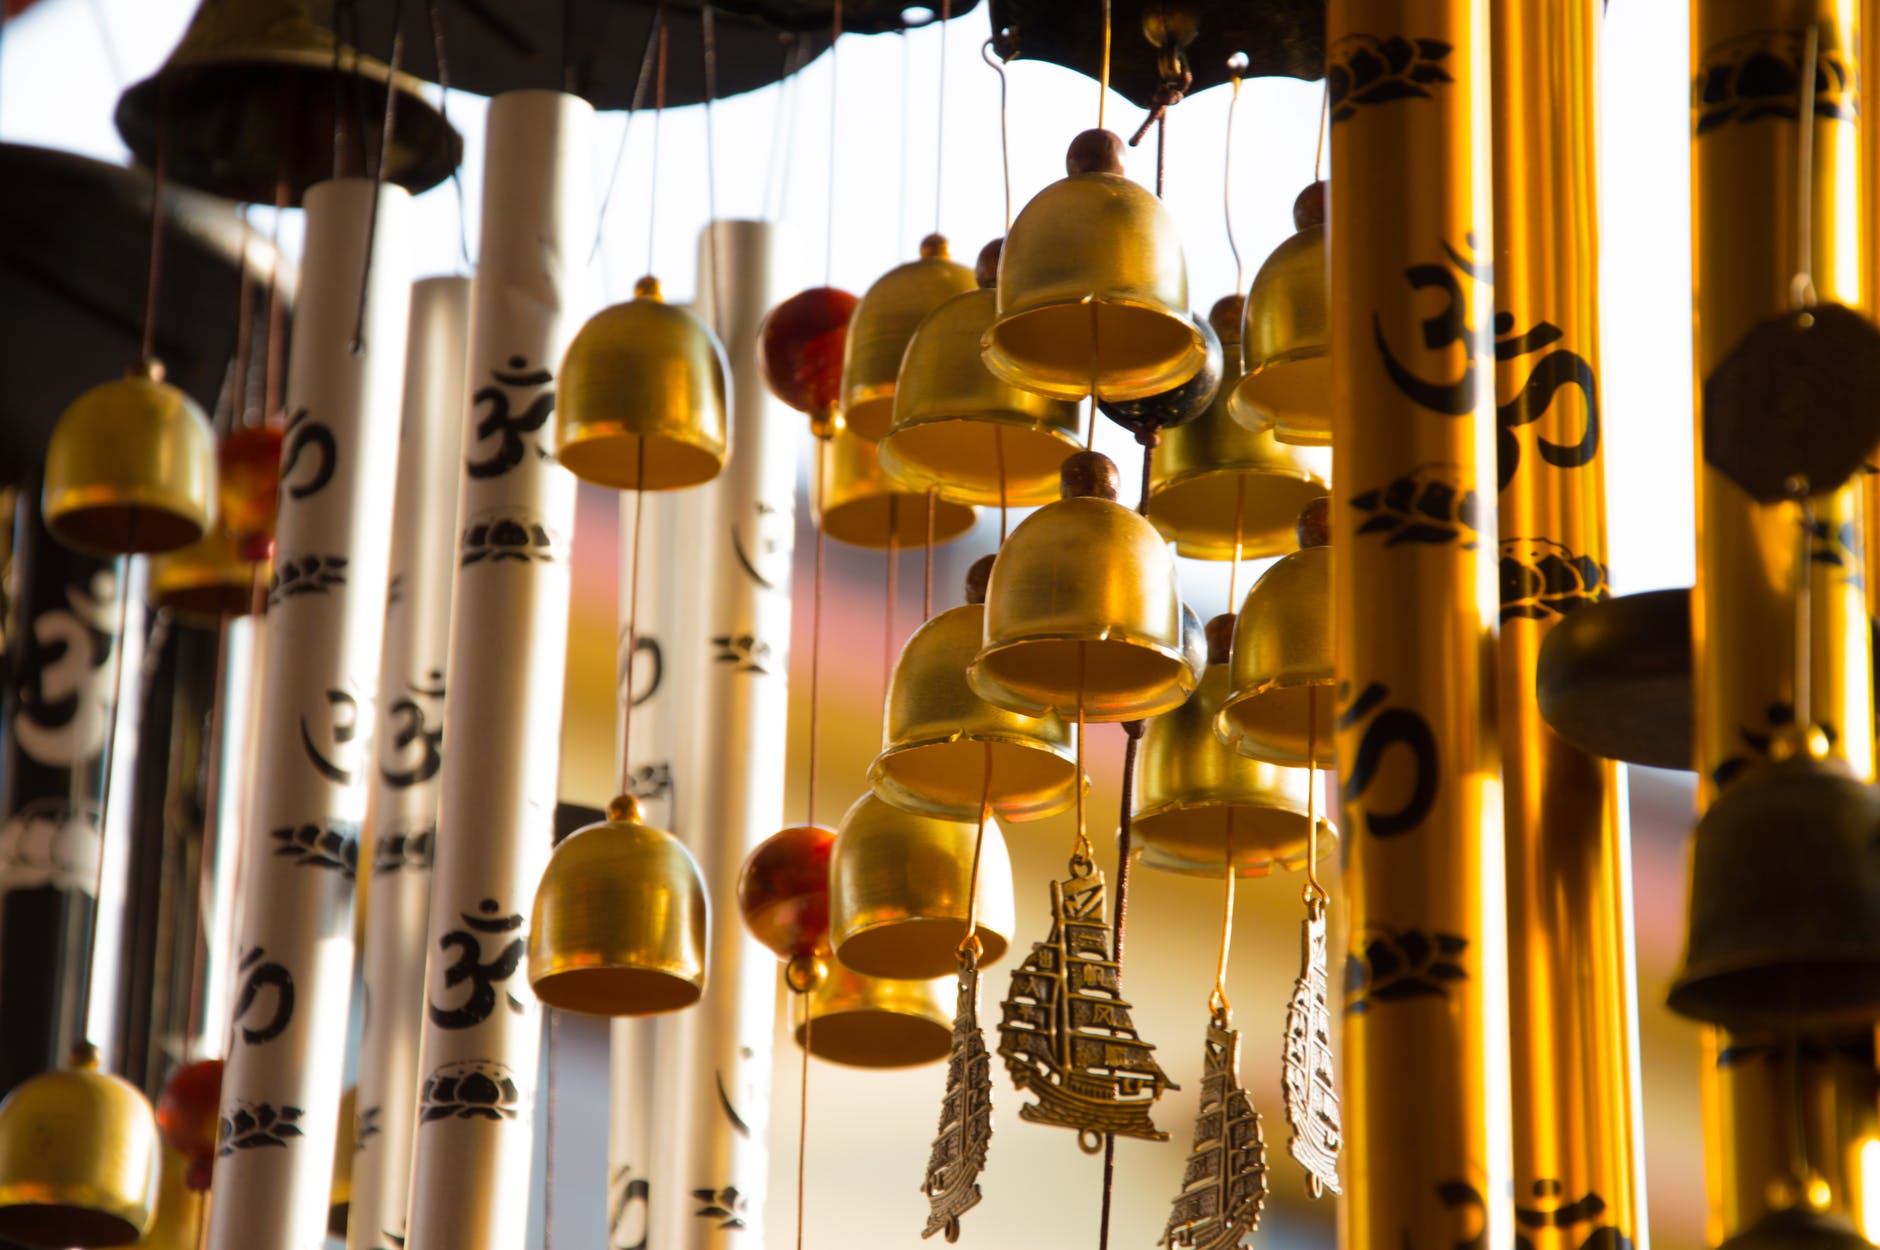 several wind chimes